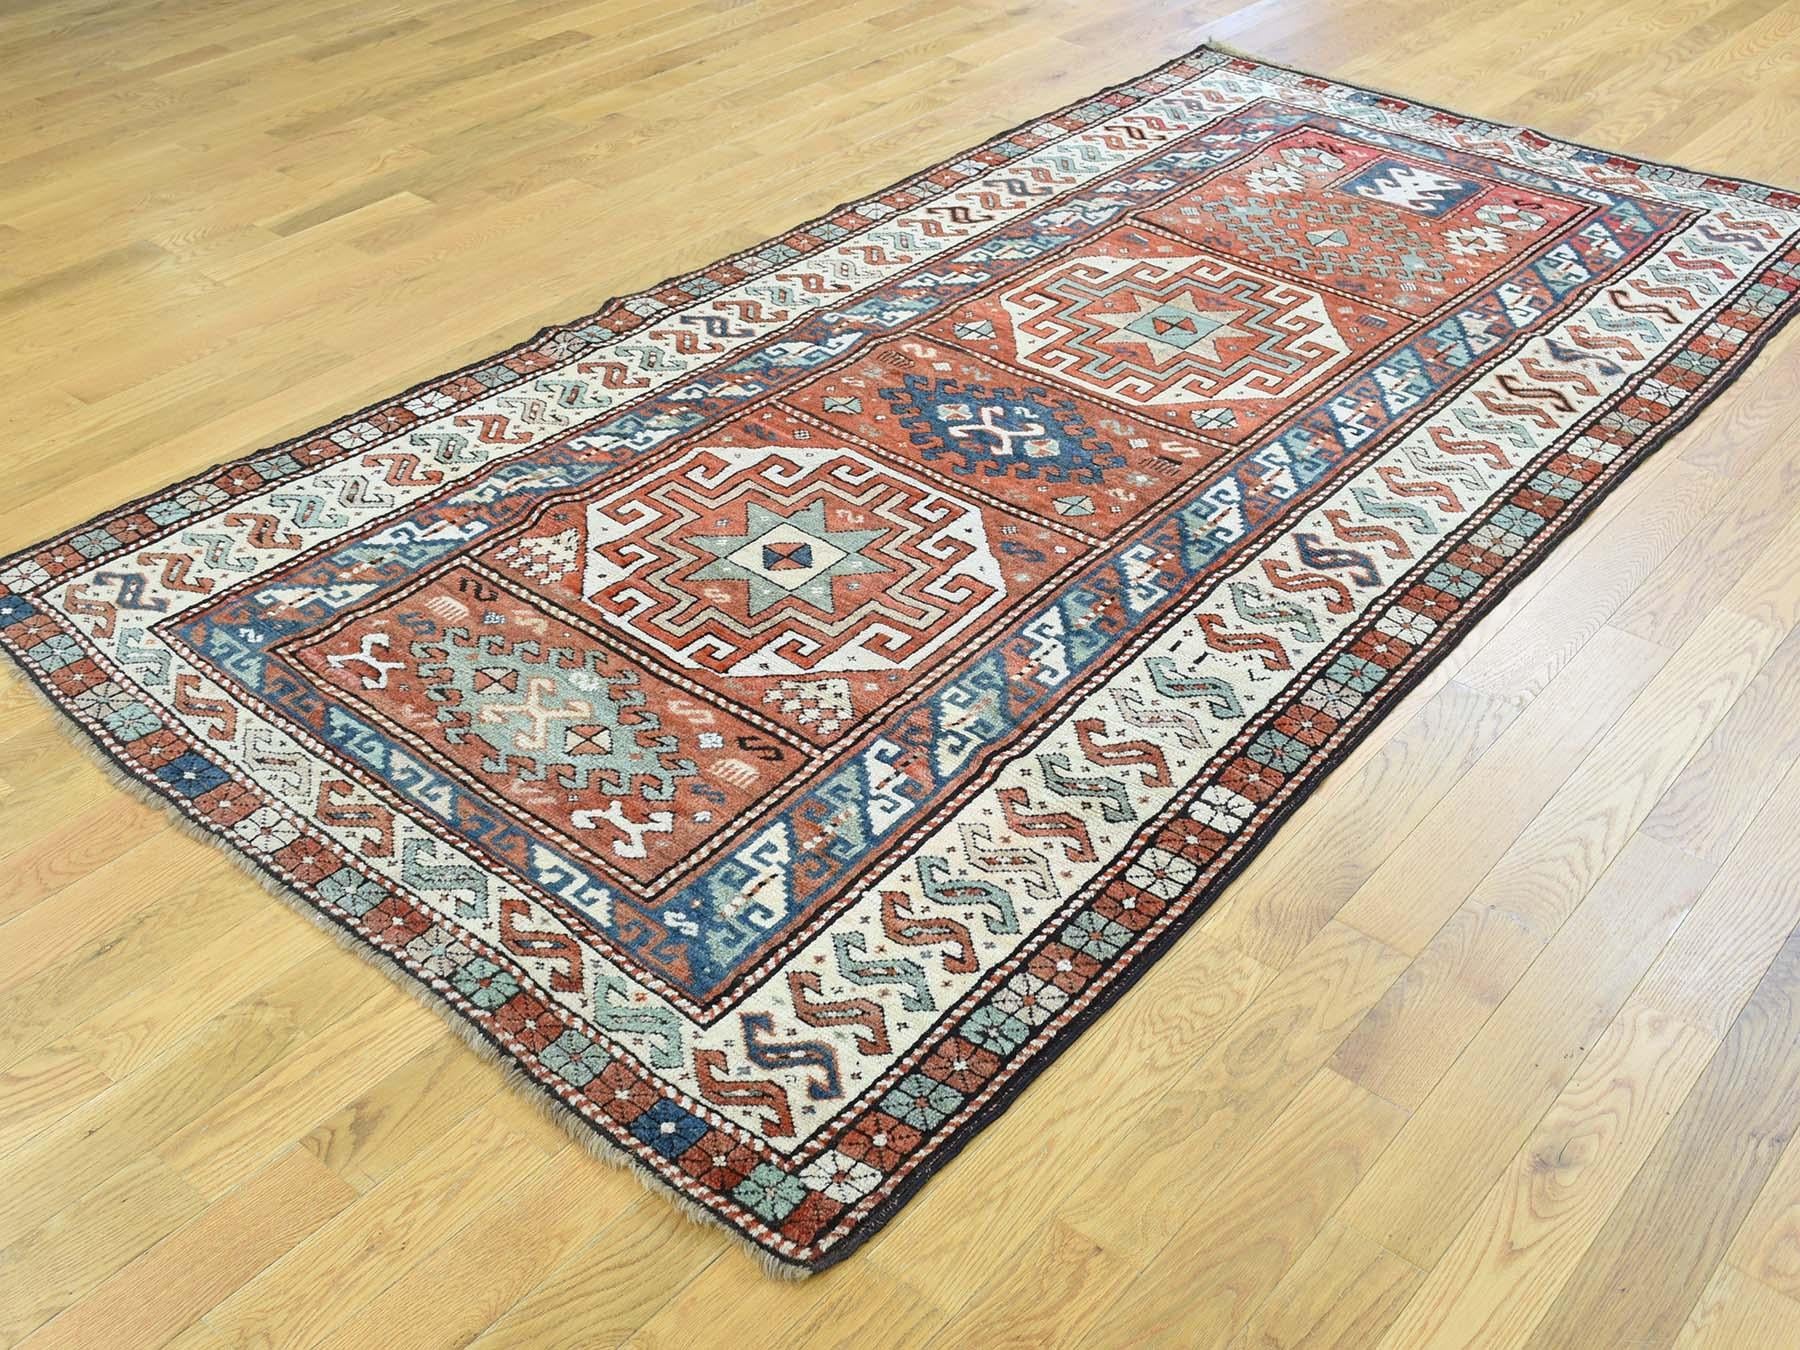 Hand-Knotted 1890 Antique Caucasian Kazak Wide Runner Rug, Clean and Soft Pile